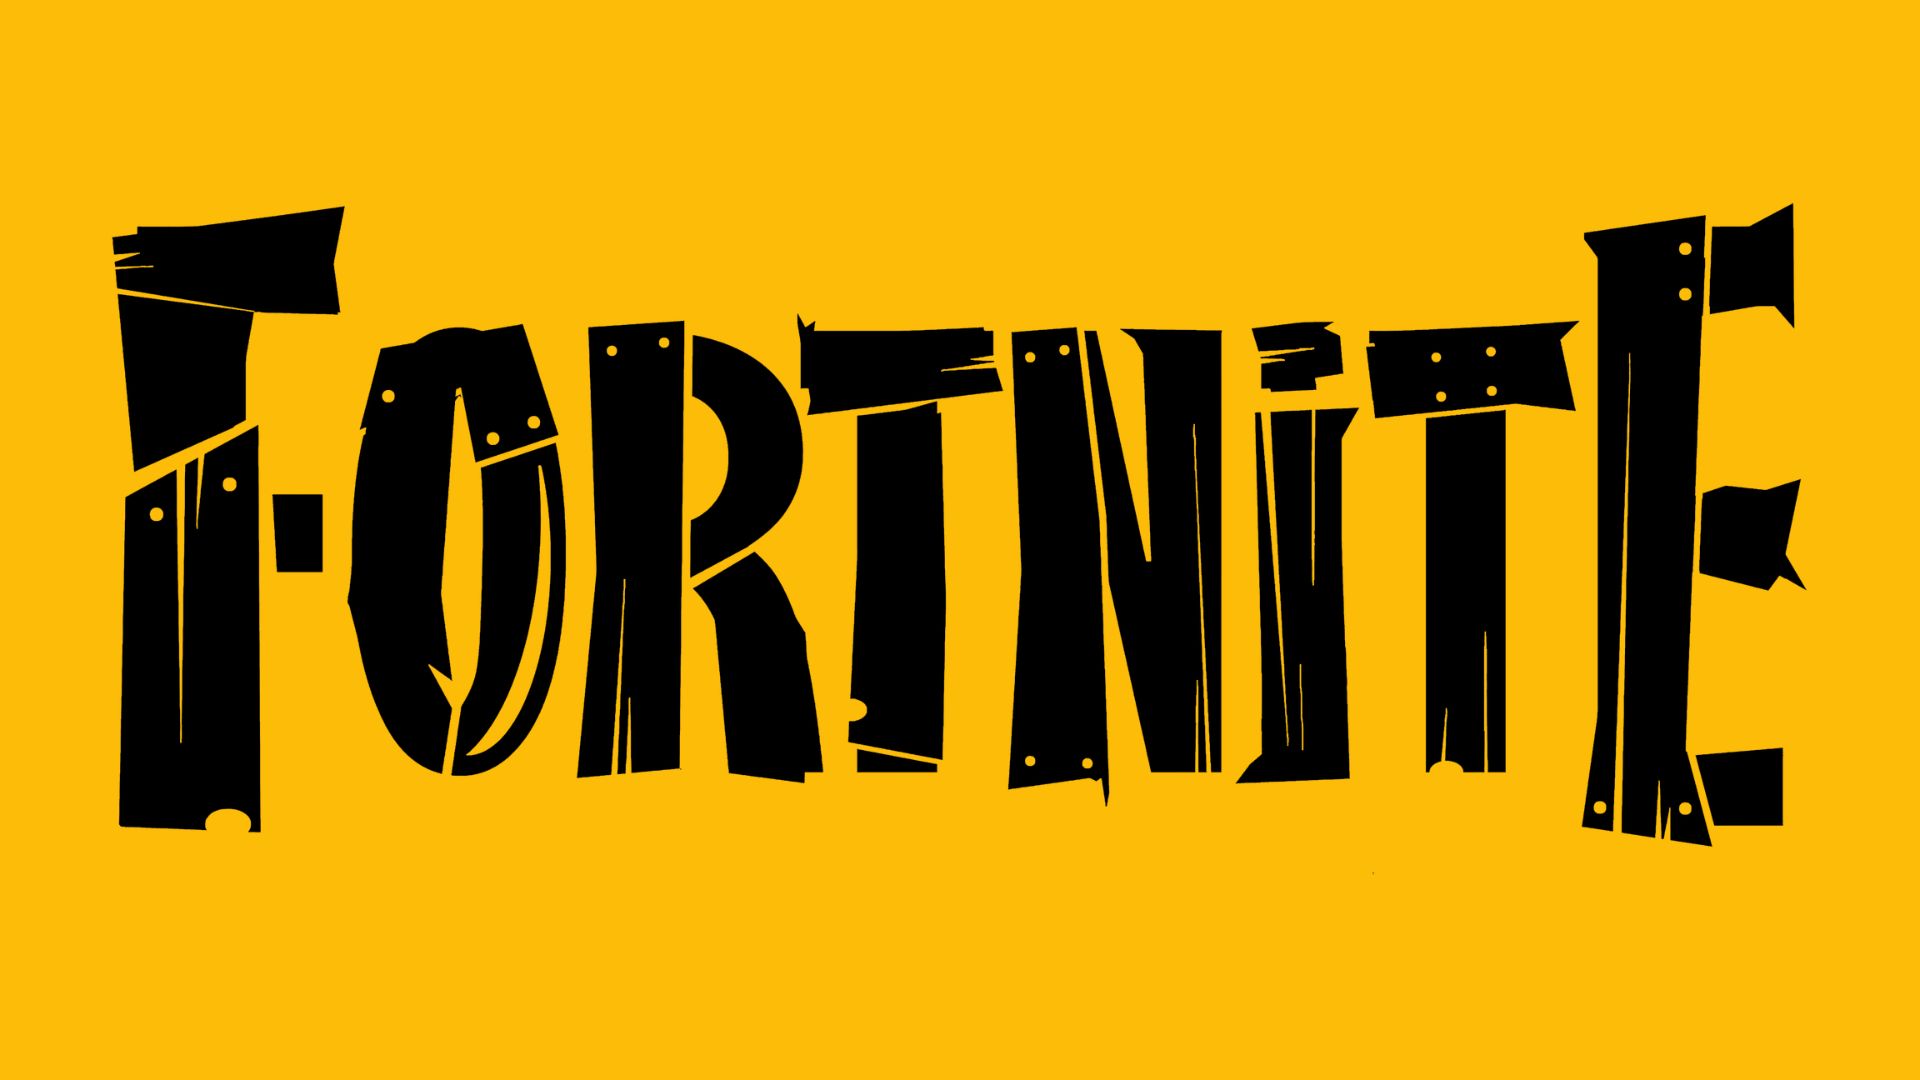 The Fortnite logo through the years | Pocket Tactics